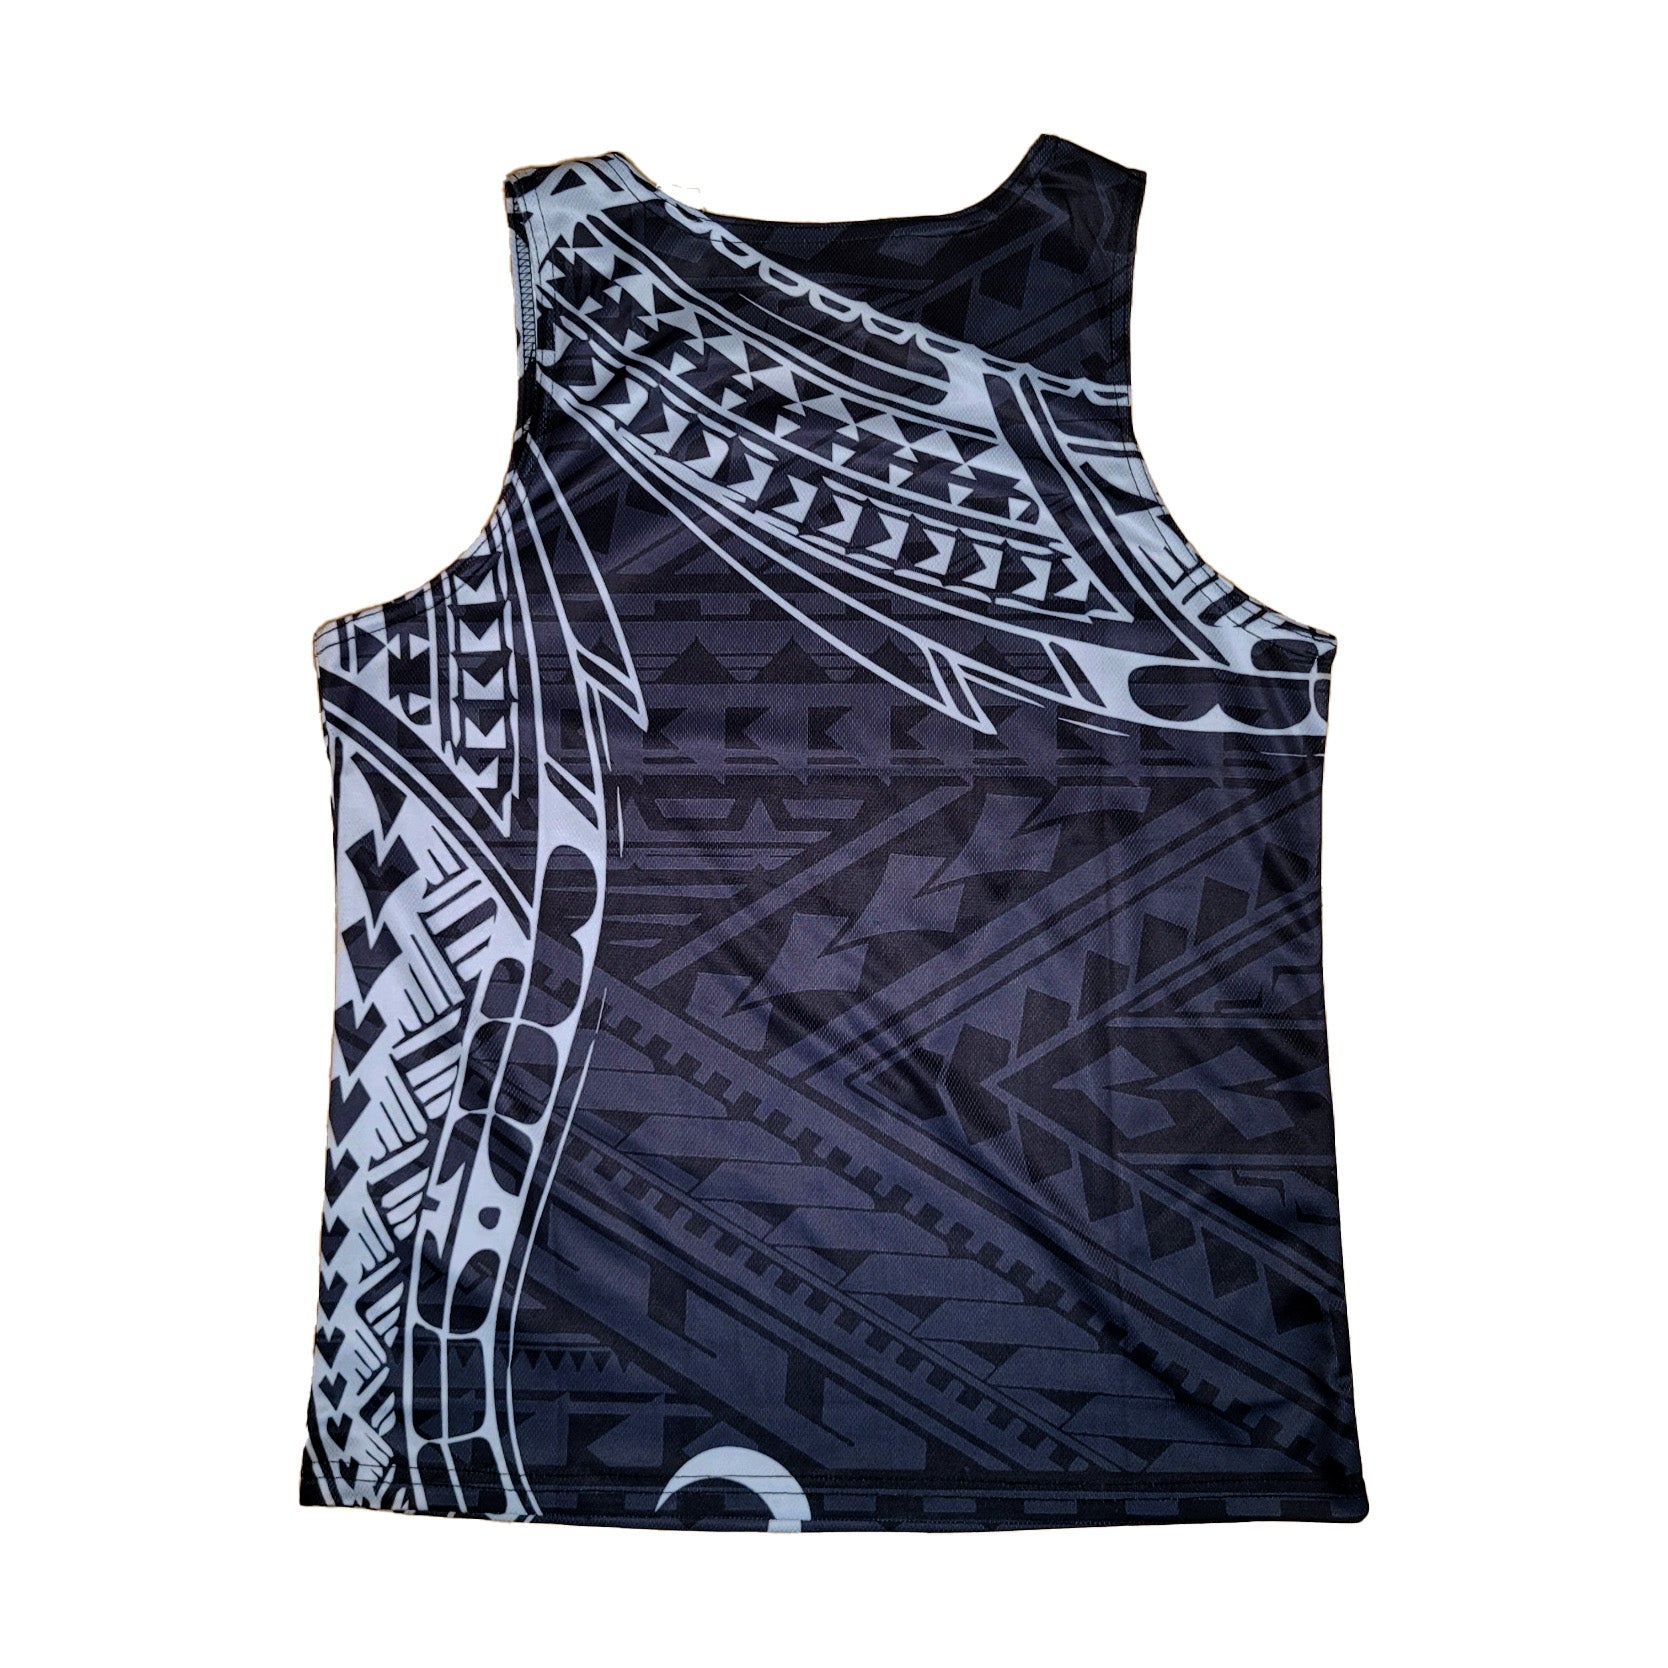 Guam Tribal Sublimated Black and Gray Tank Top